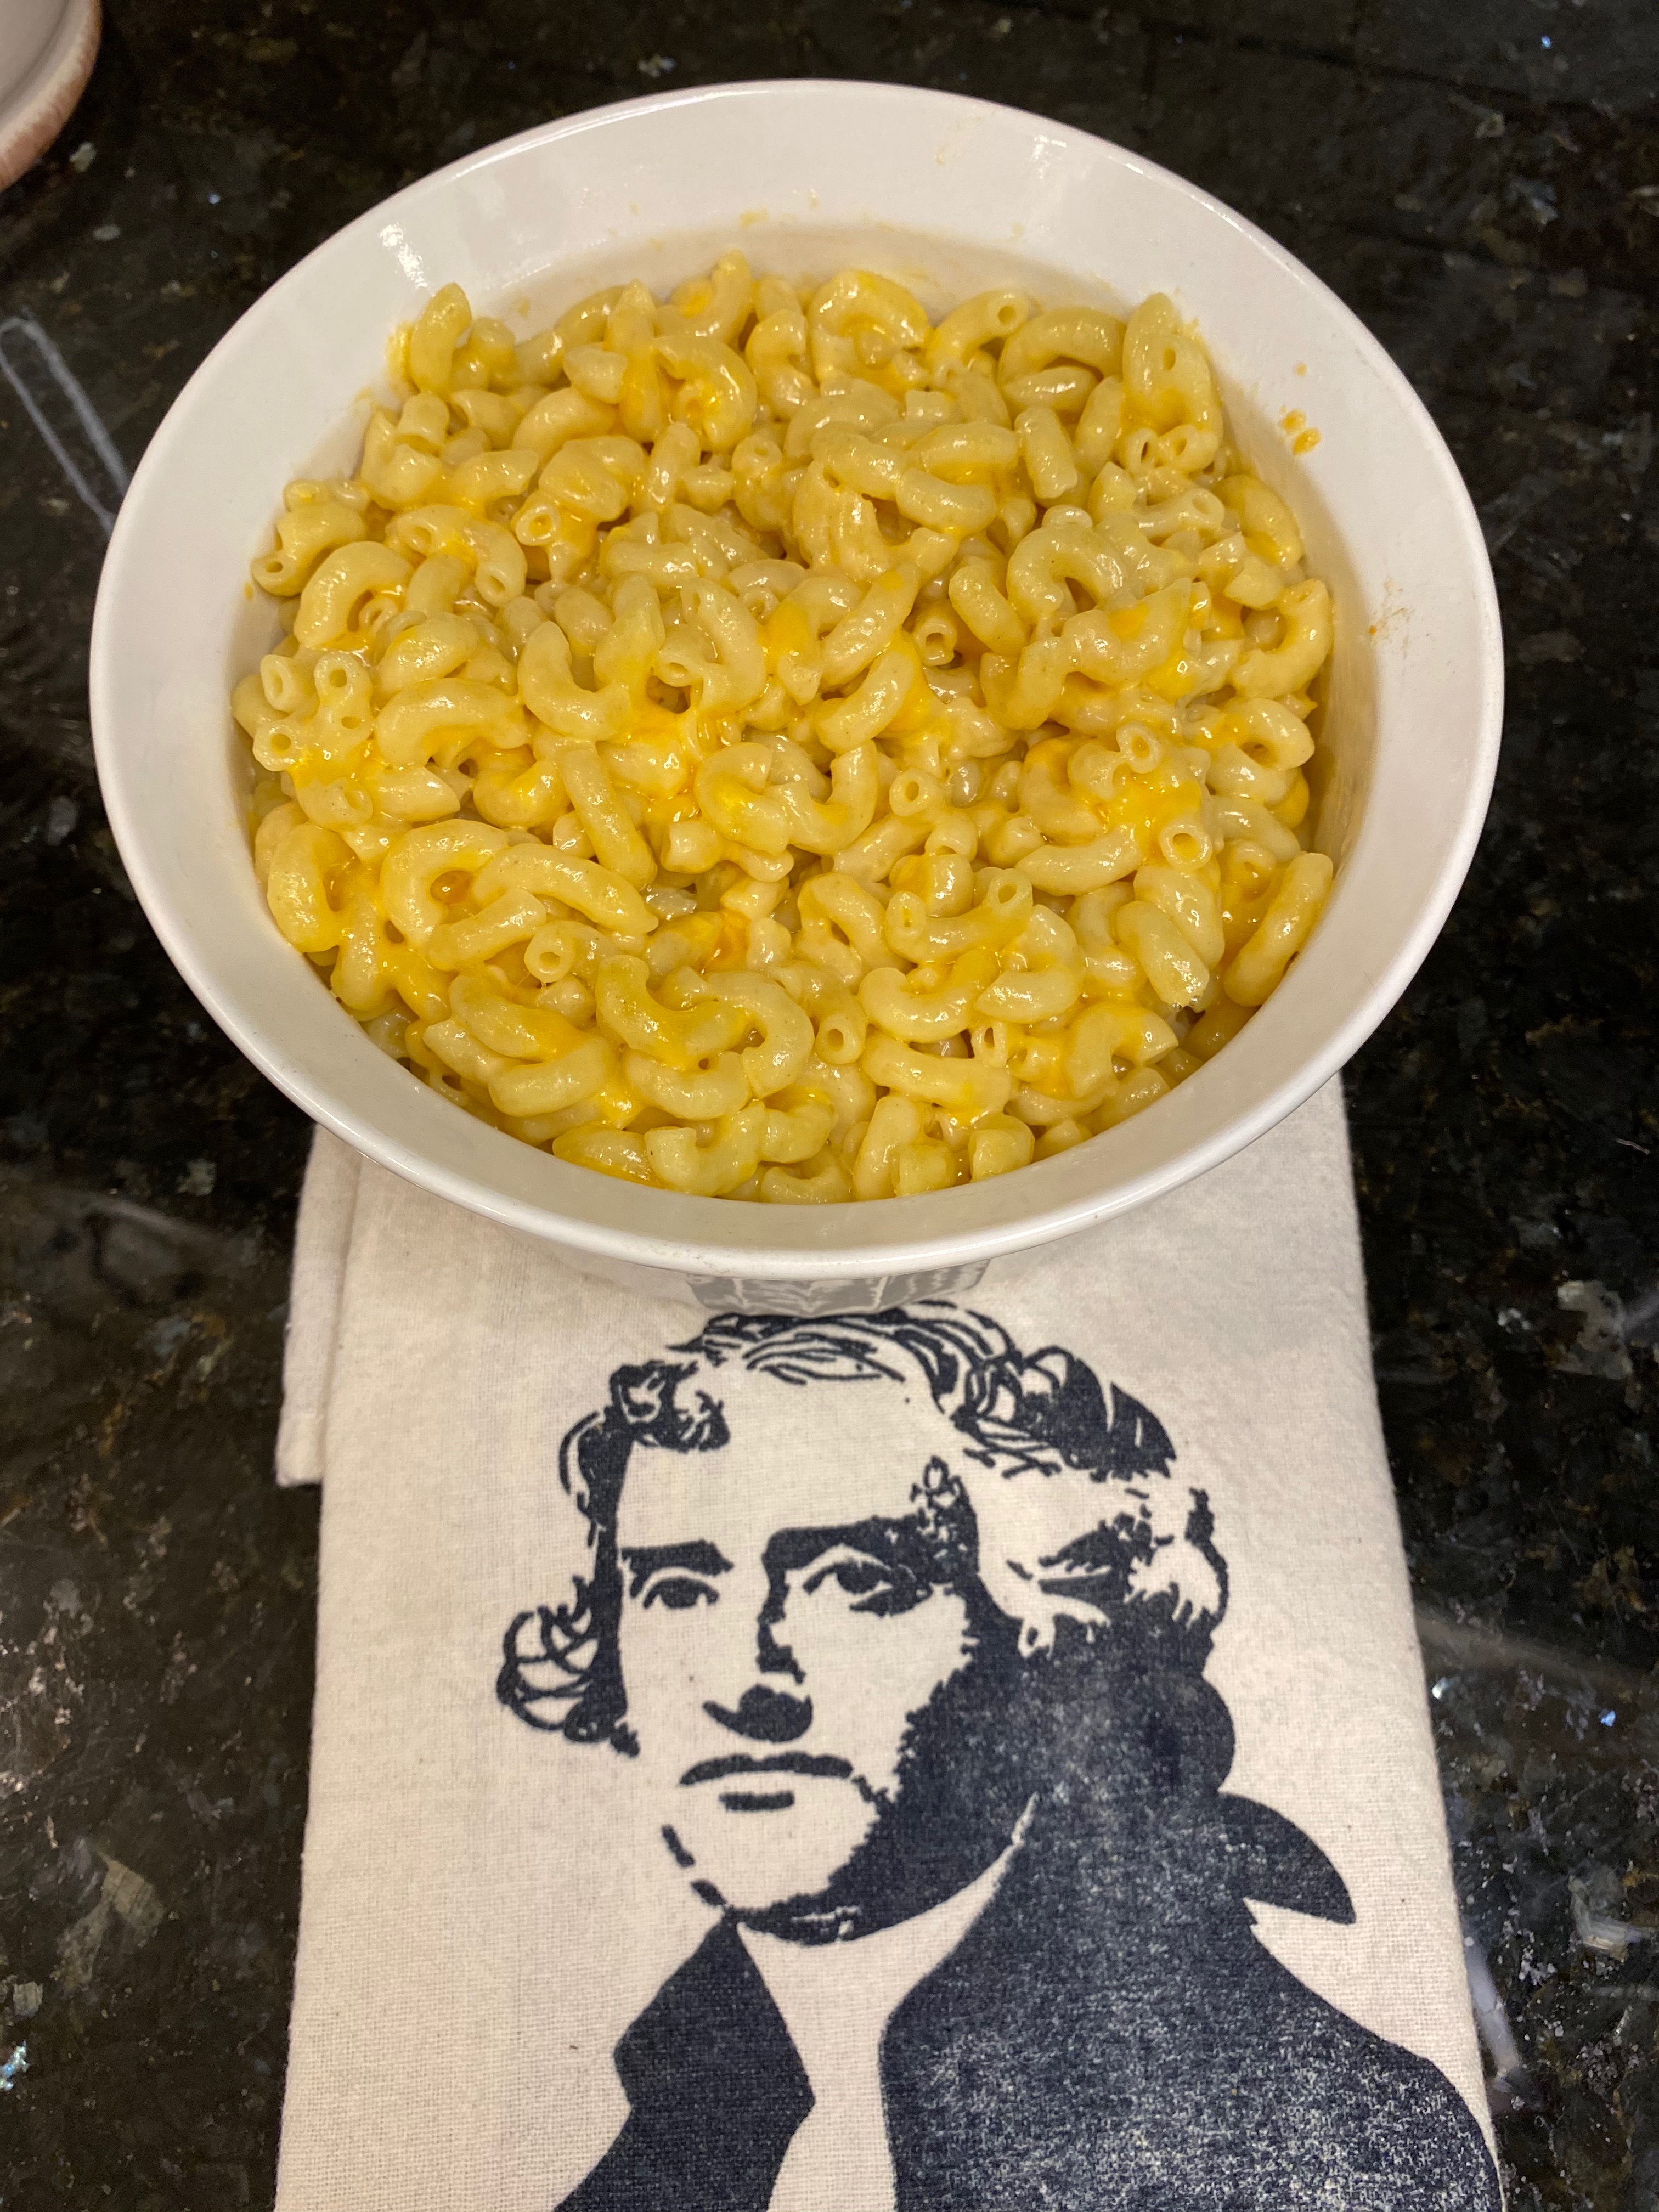 History in the Kitchen: The Declaration, Equality, & Mac and Cheese